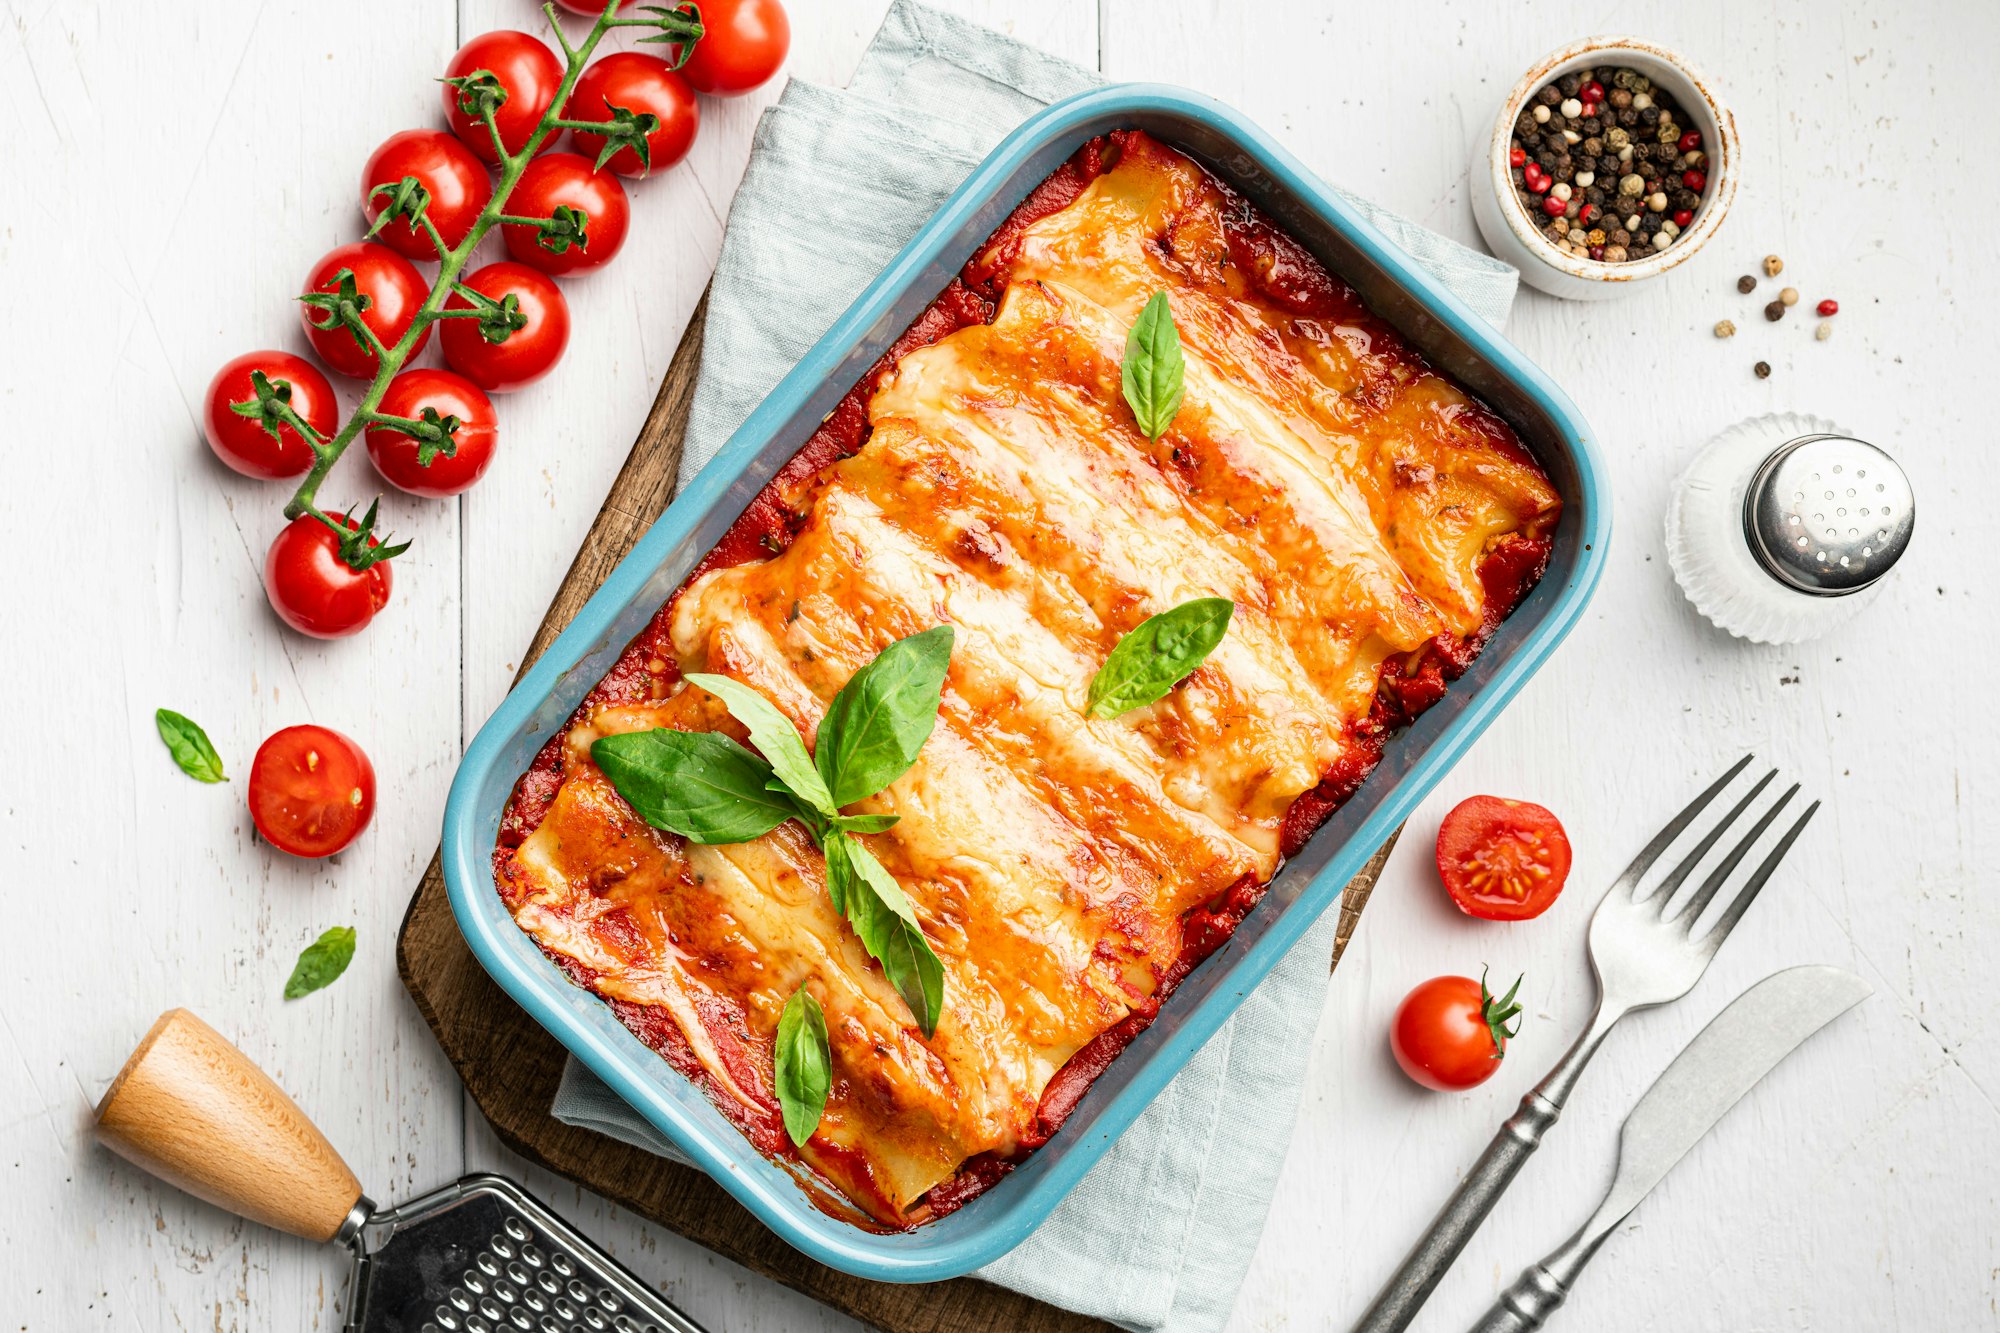 Cannelloni with meat, tomato sauce and cheese